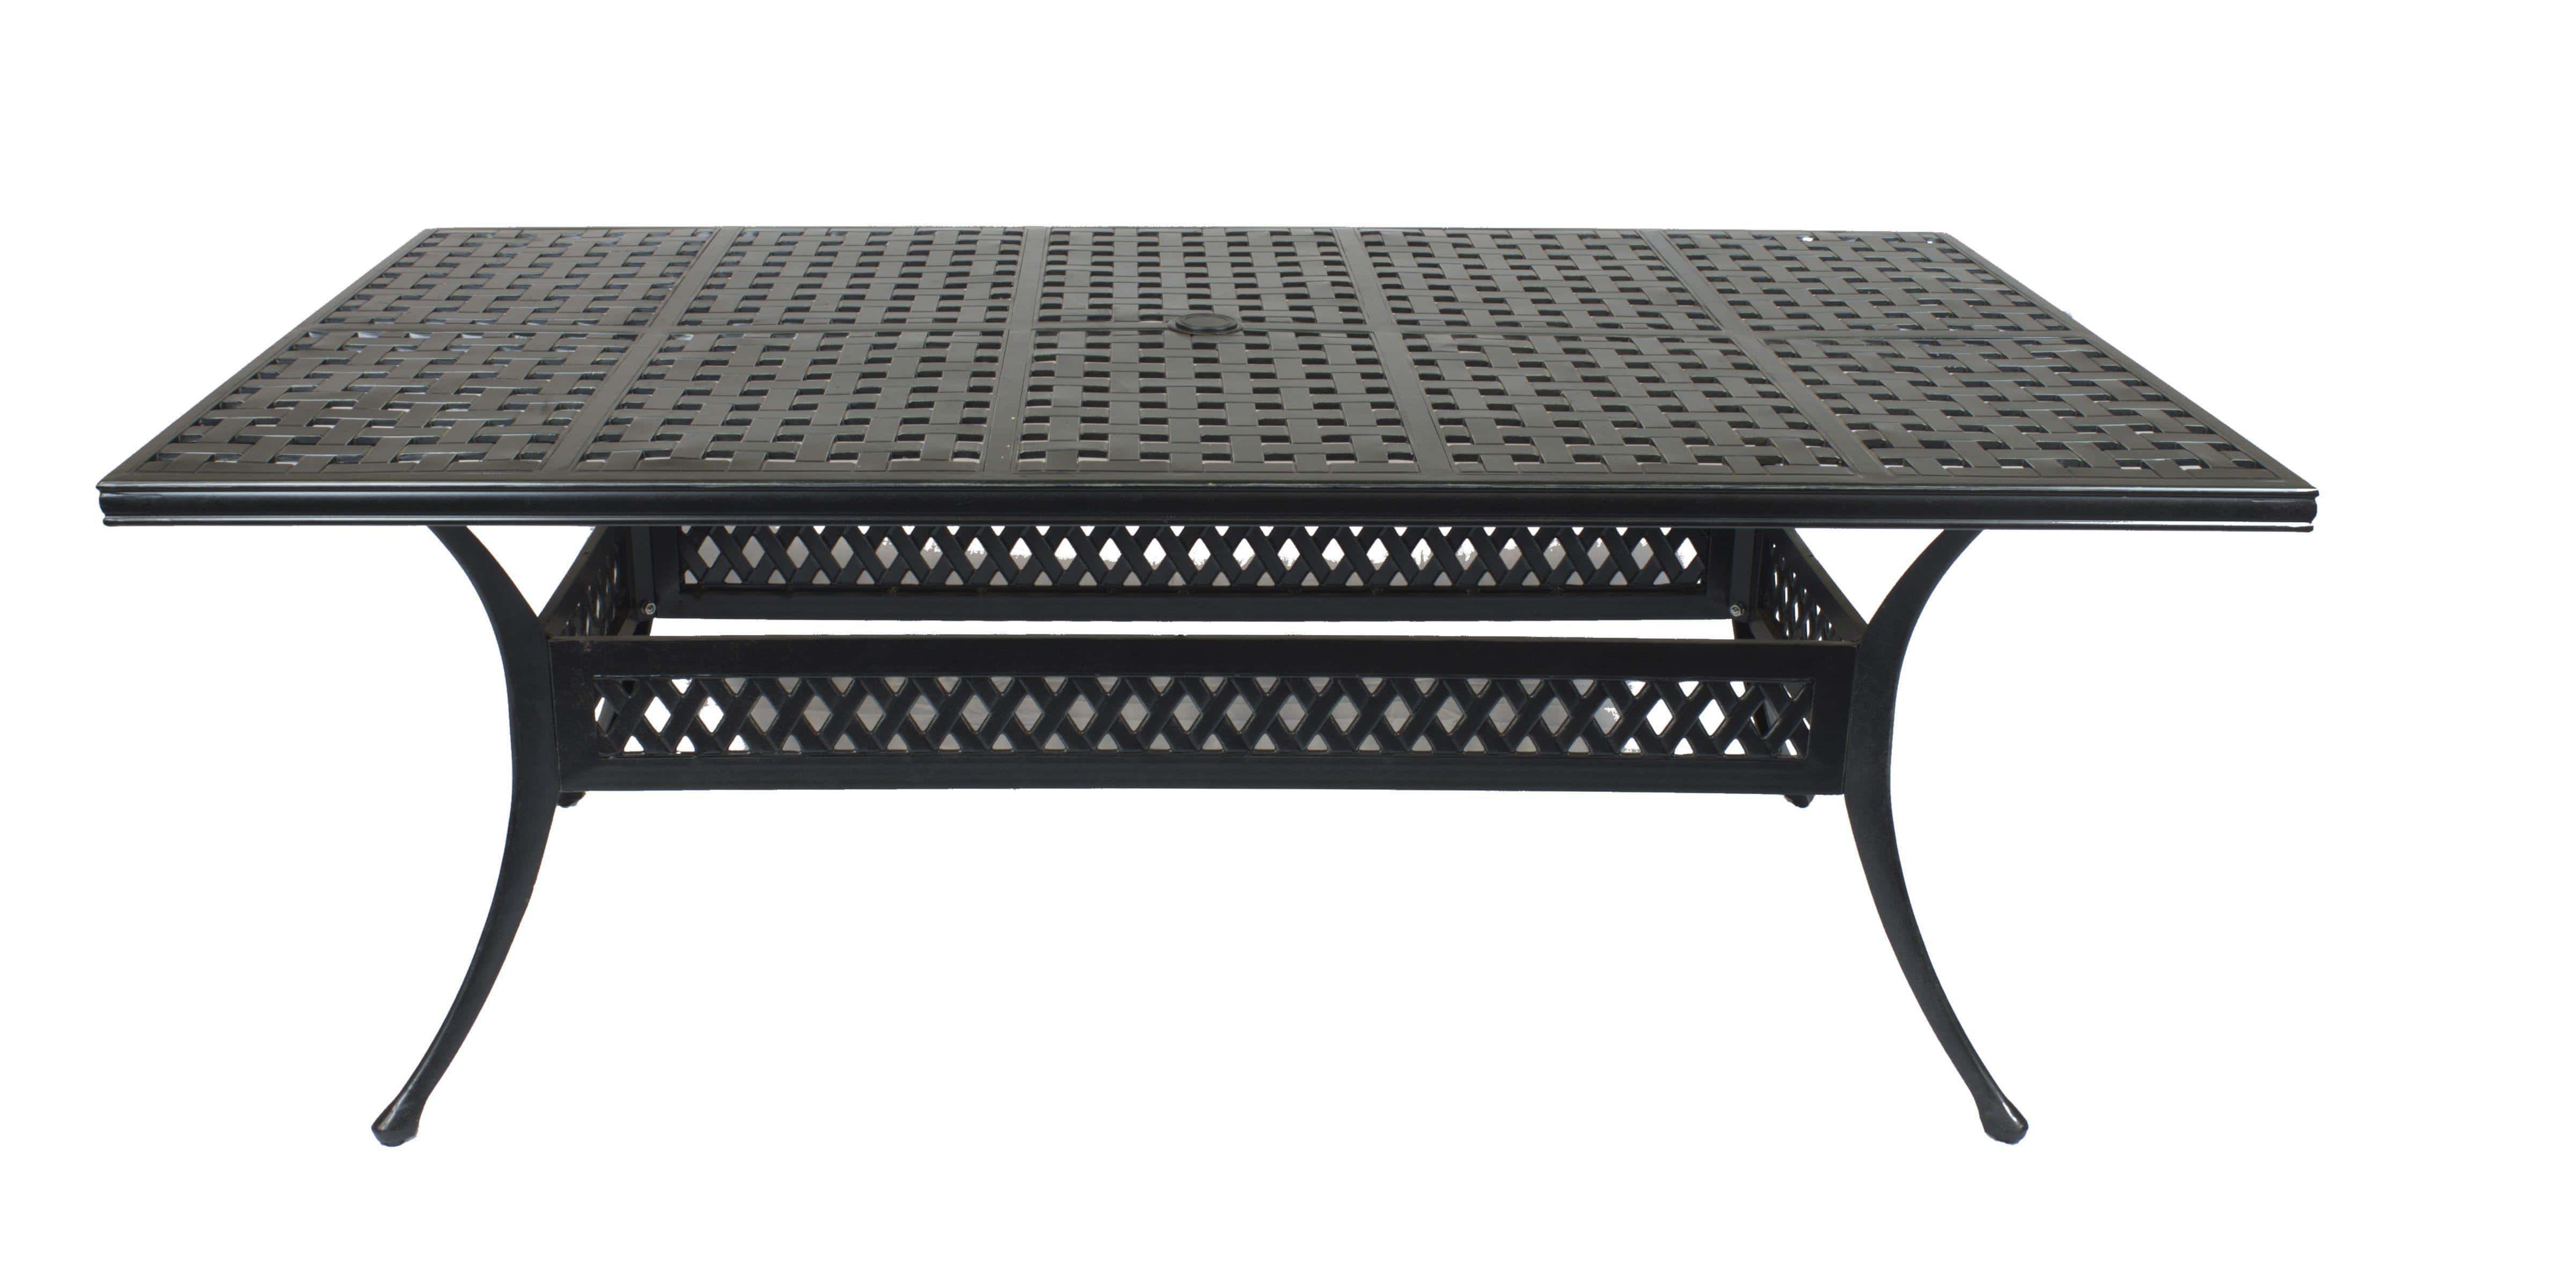 Lawton Casual Comfort Outdoor Dining Table Lawton Casual Comfort - 76x42" Rectangle Dining Table